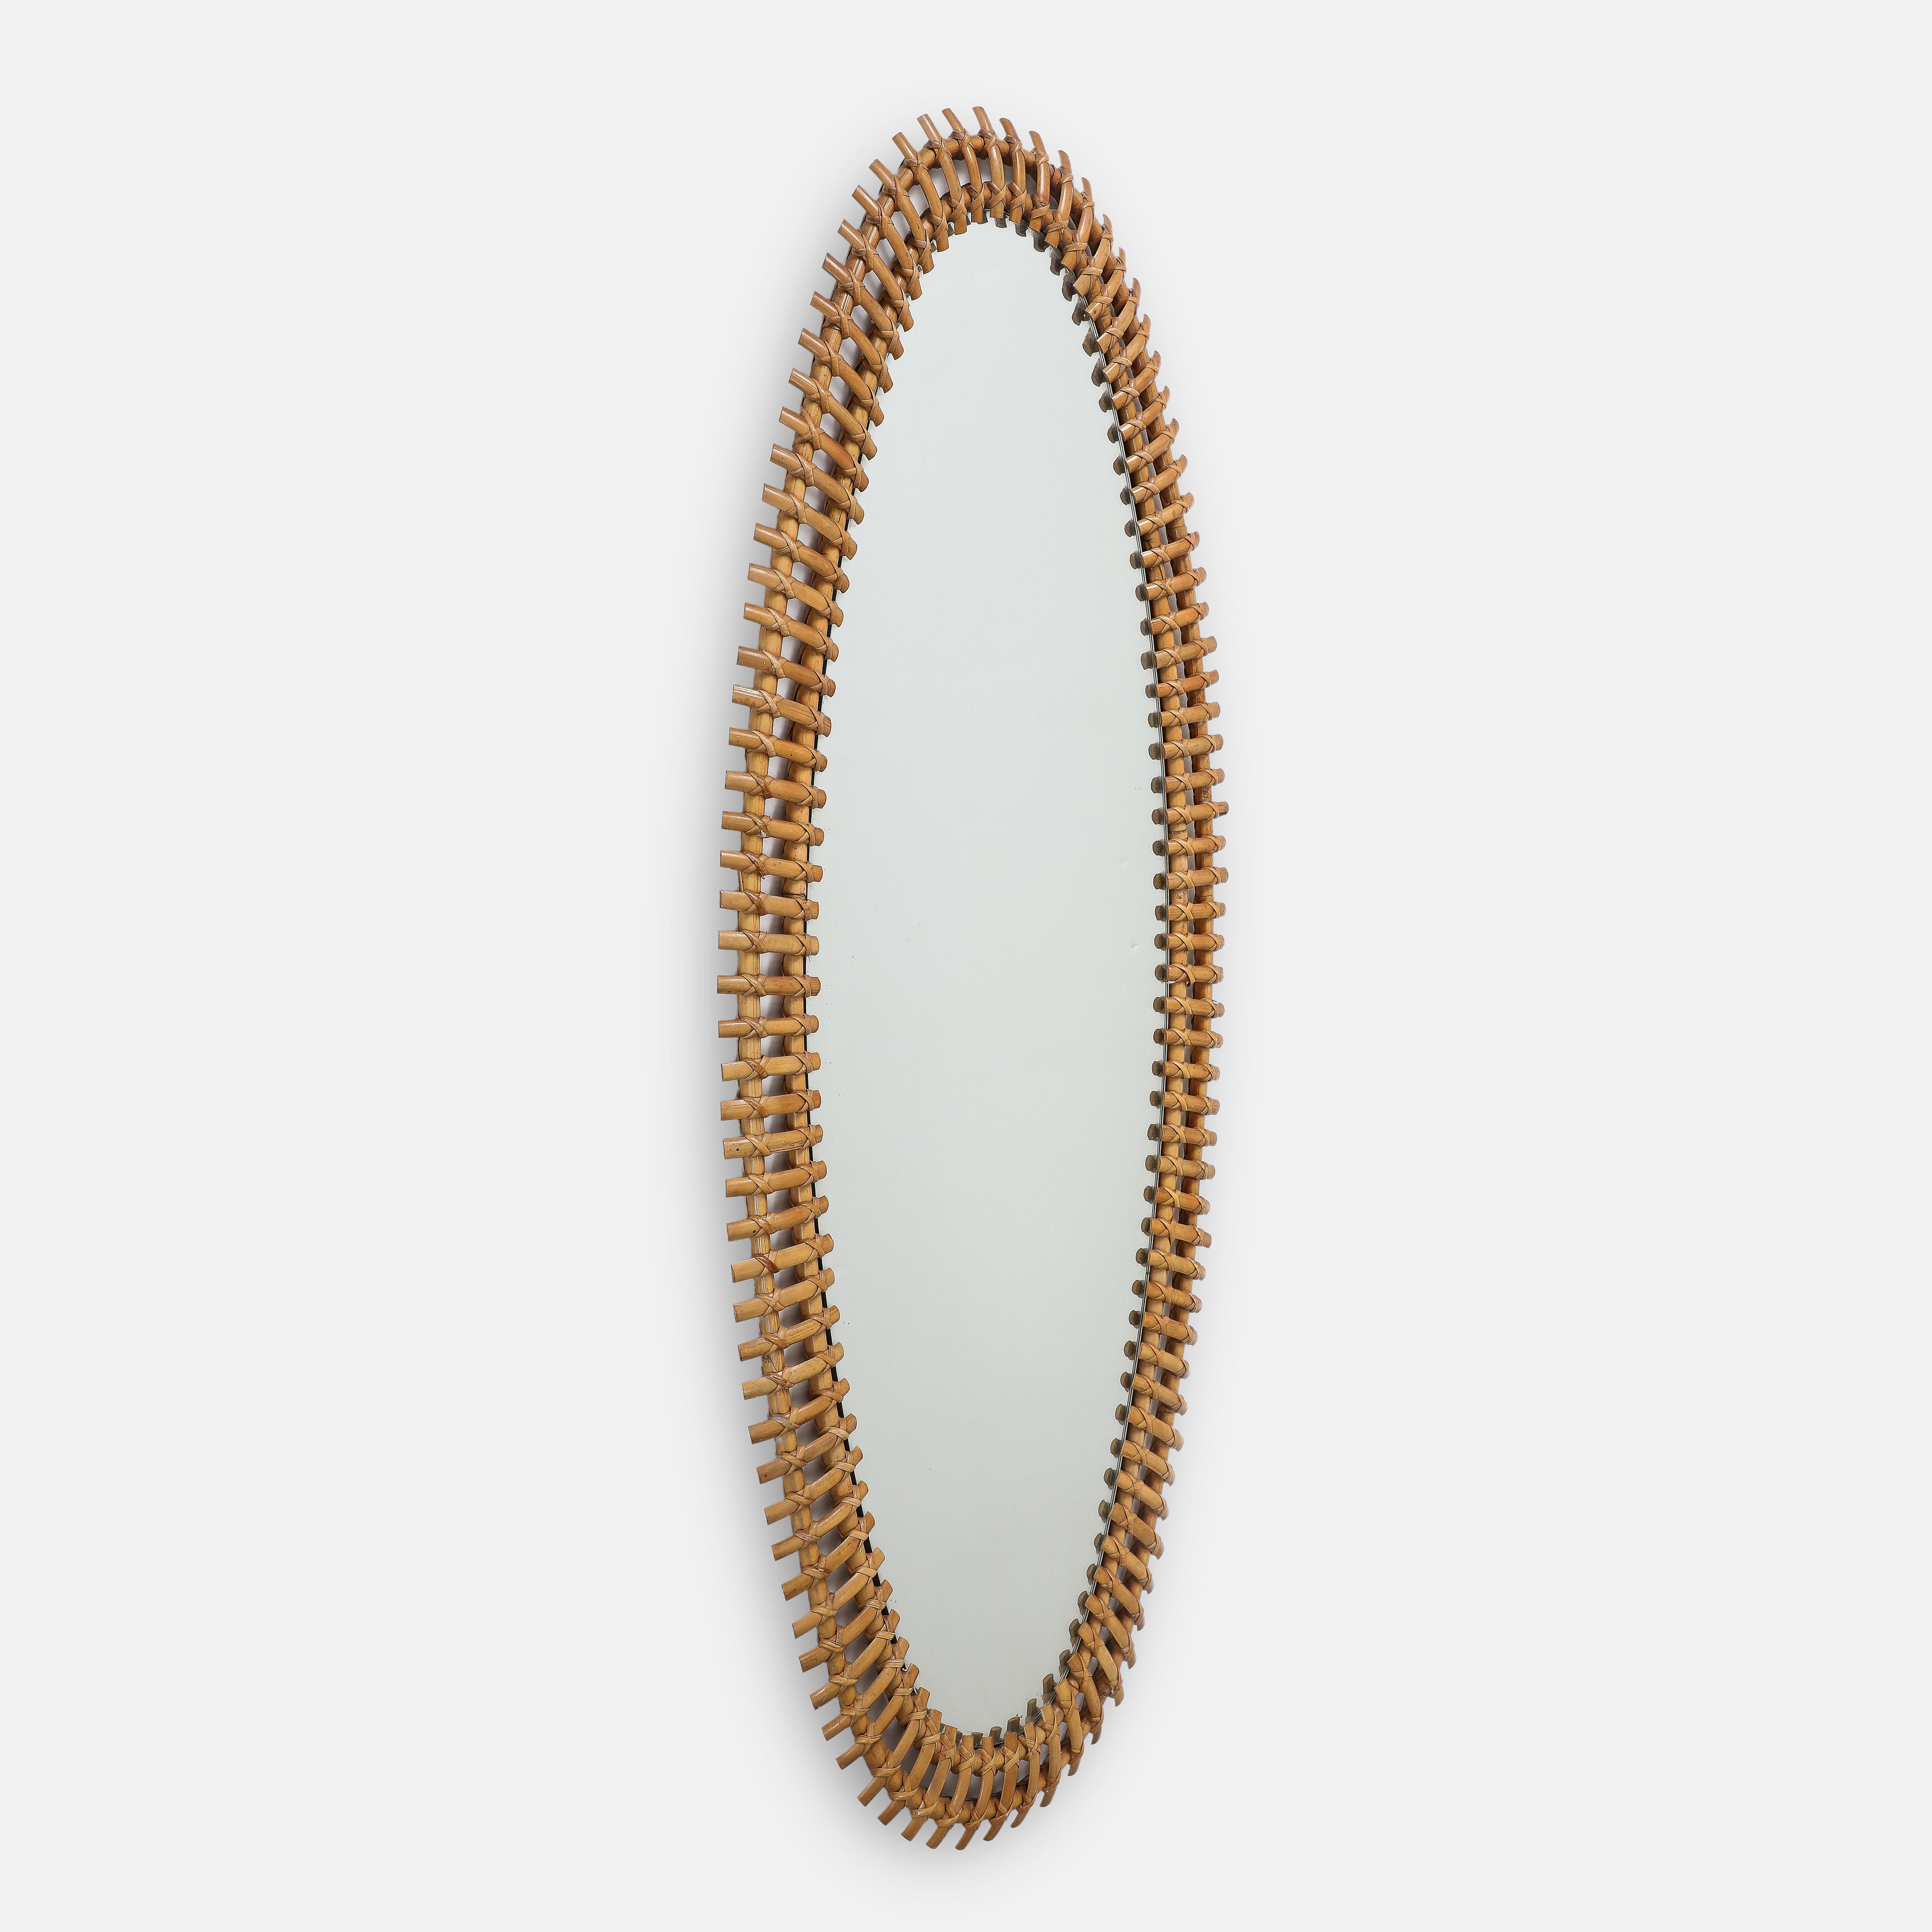 Bonacina rare grand scale oval mirror with slightly curved bamboo pieces hand-woven on frame of double bamboo rods with original mirrored glass. This monumental mirror is striking in size and elegant in its simple organic design and will compliment